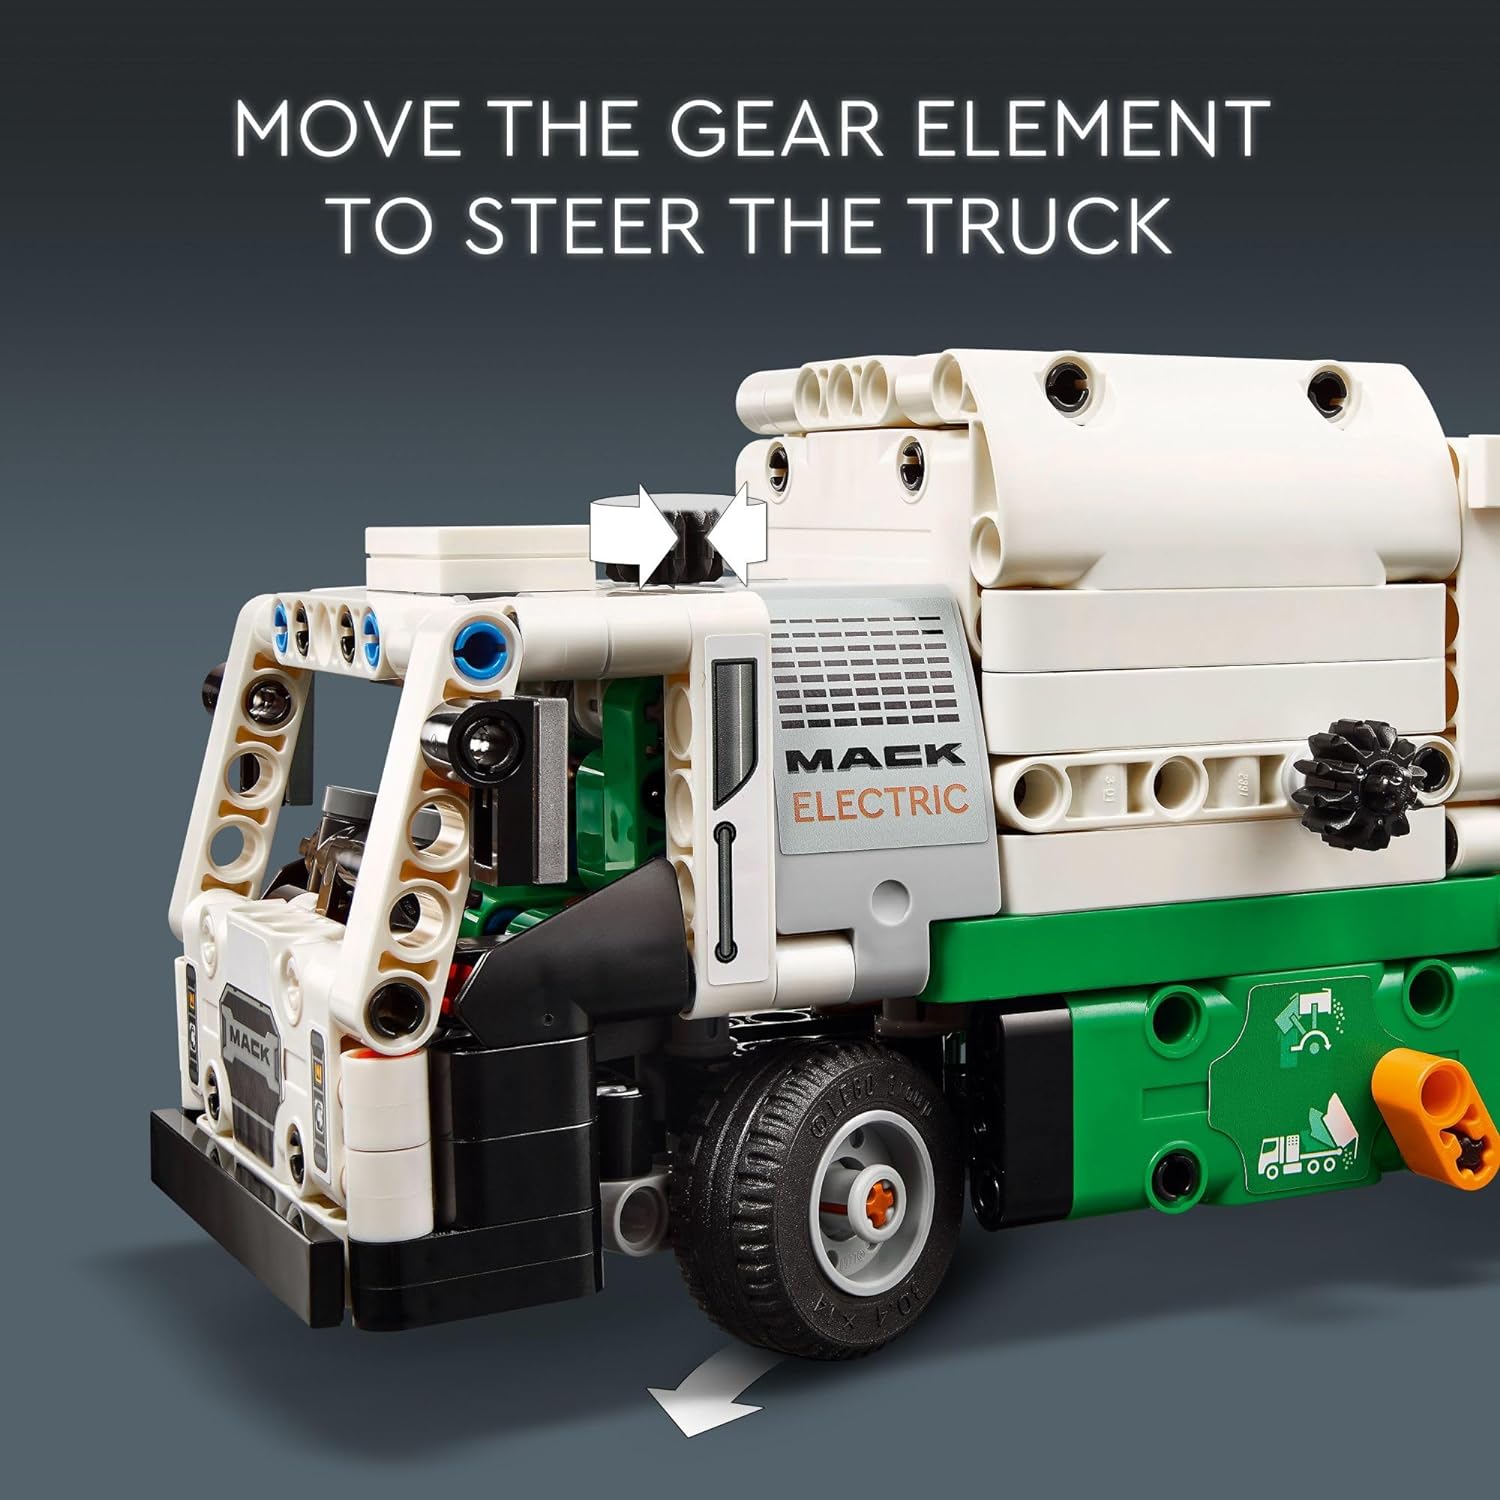 LEGO 42167 Technic Mack LR Electric Garbage Truck Toy, Buildable Kids Truck for Pretend Play.